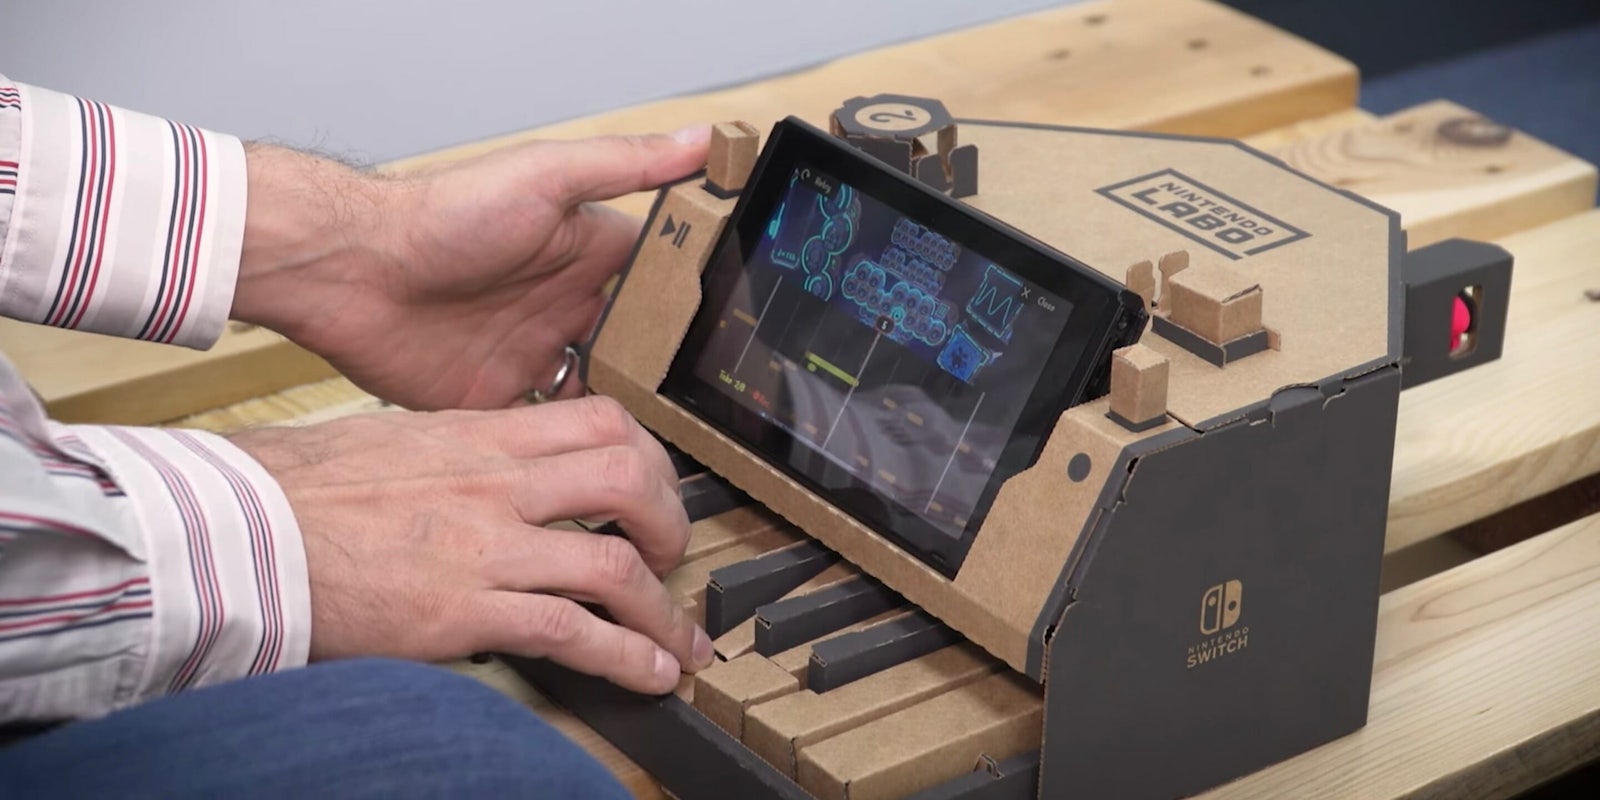 'Game of Thrones' Composer Plays Iconic Theme on Nintendo Labo